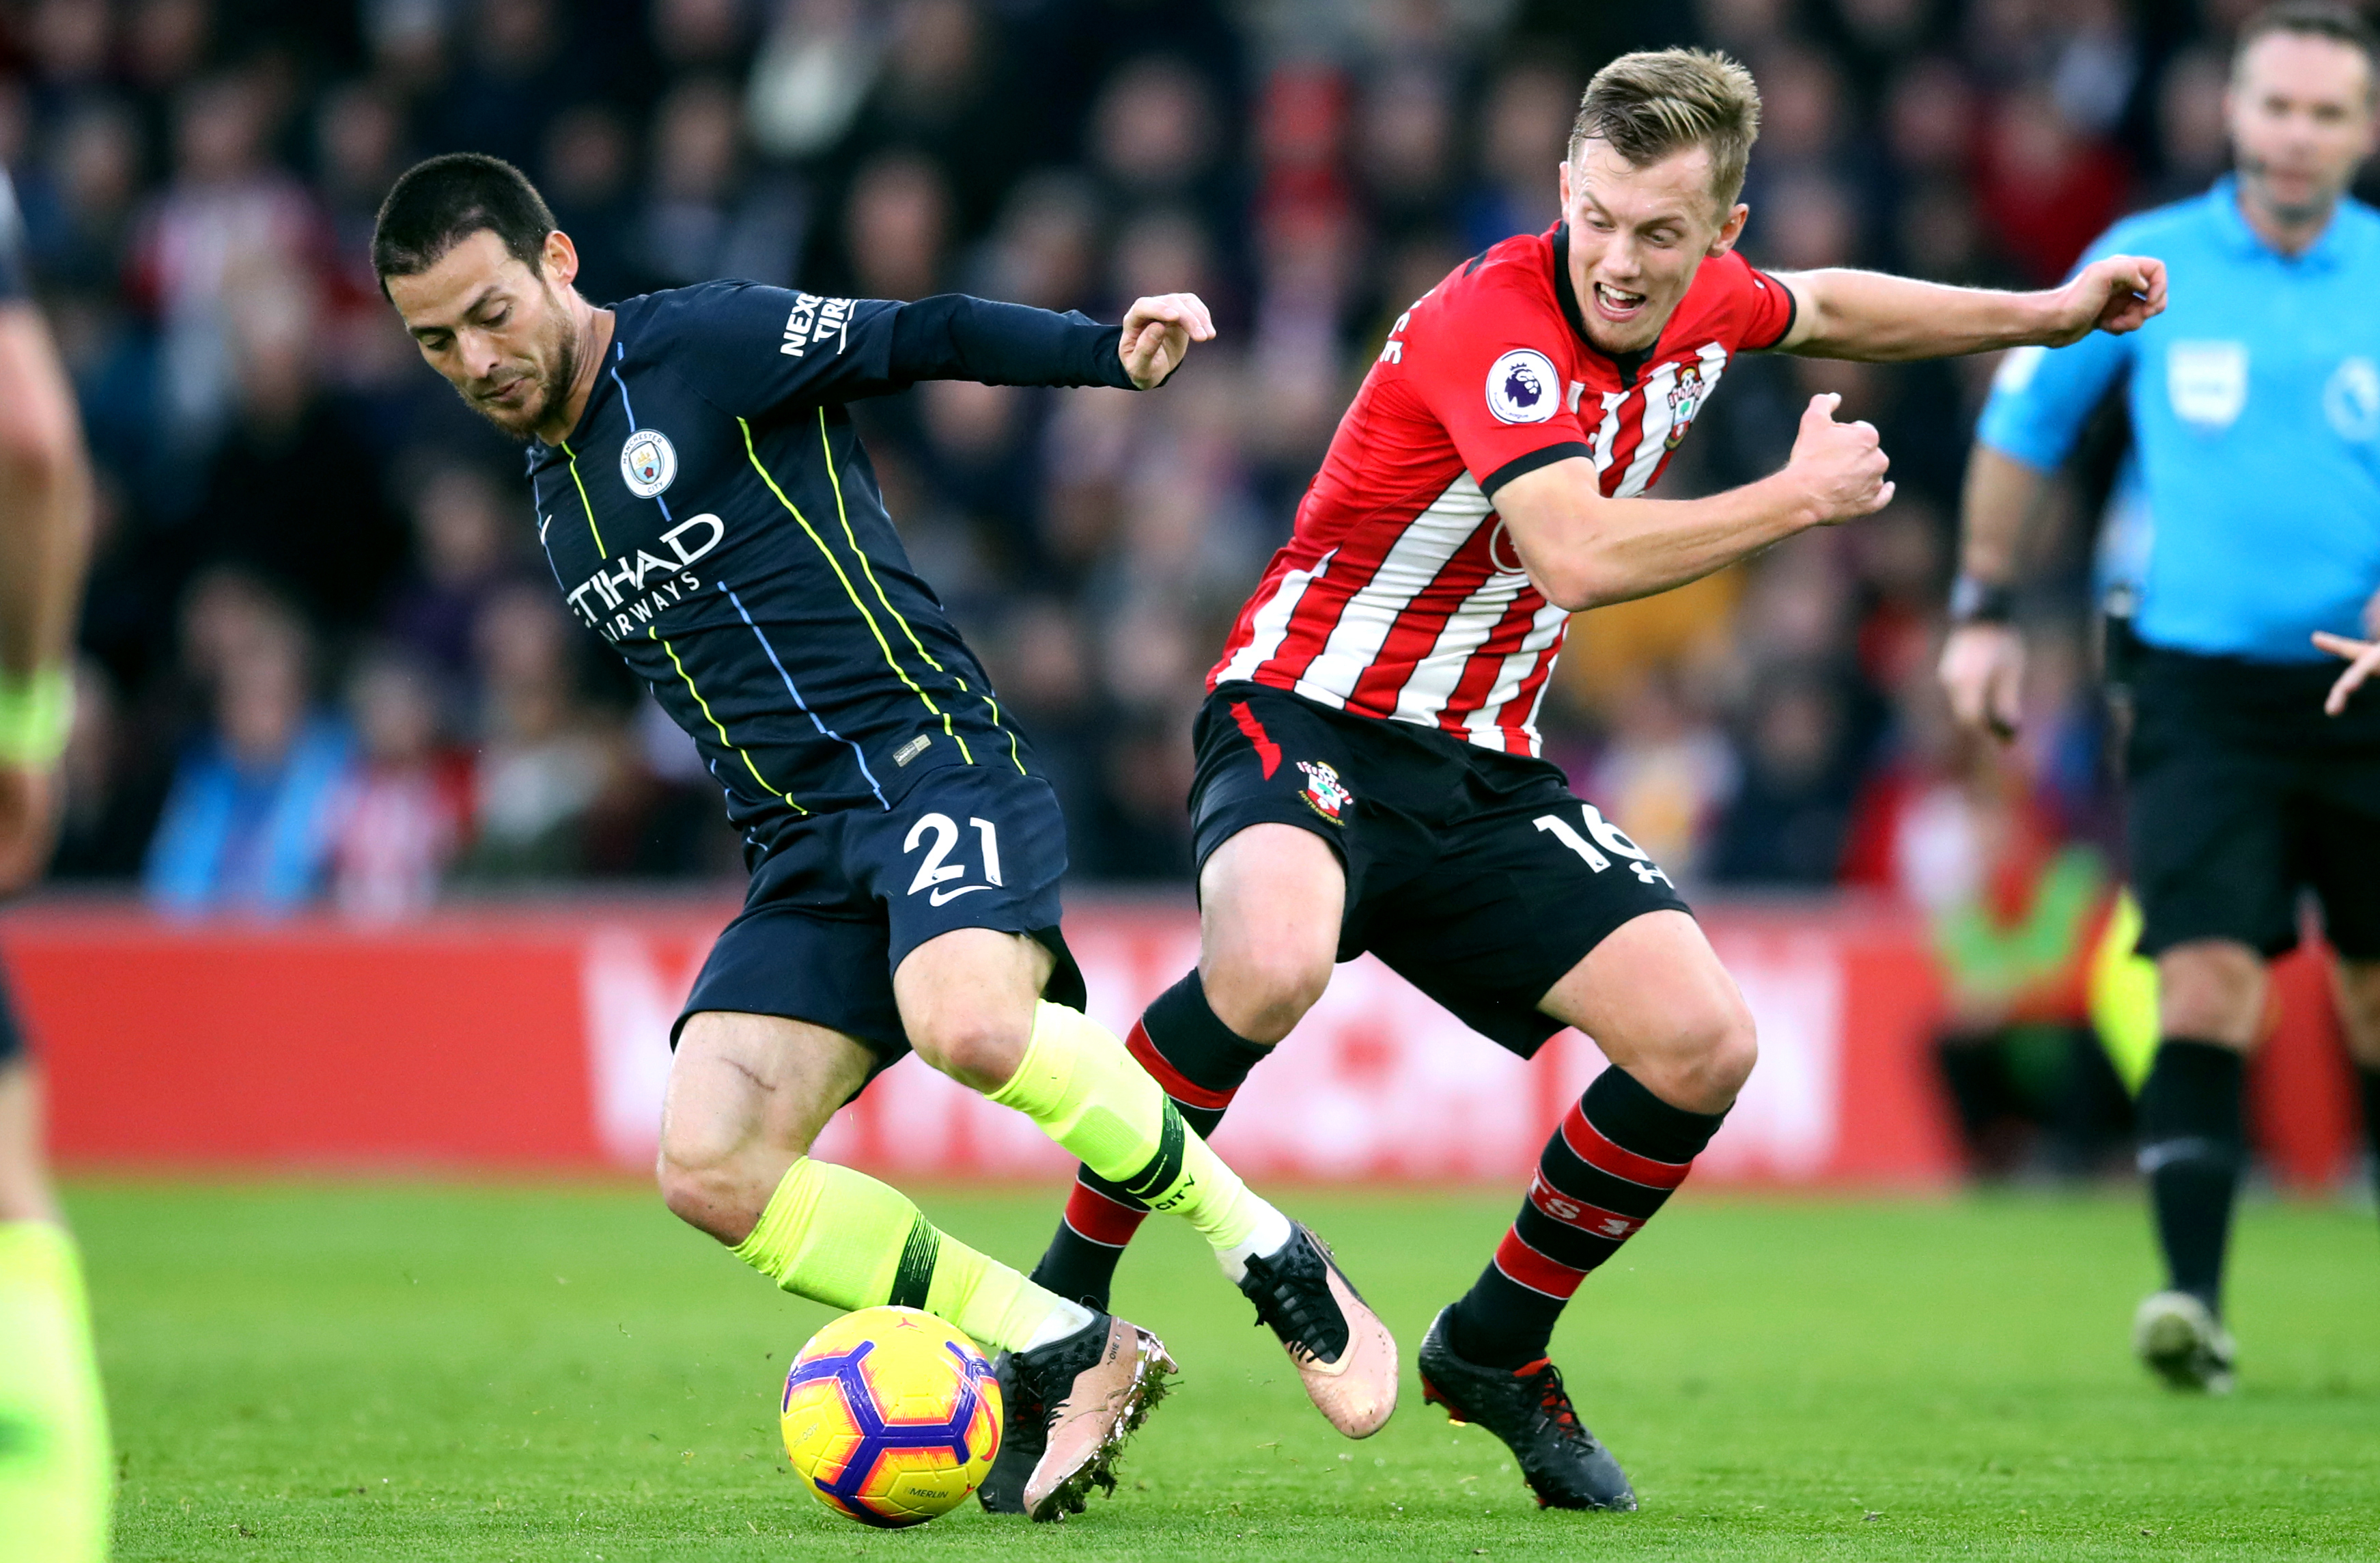 Manchester City's David Silva (left) and Southampton's James Ward-Prowse battle for the ball during the Premier League match at St Mary's Stadium, Southampton